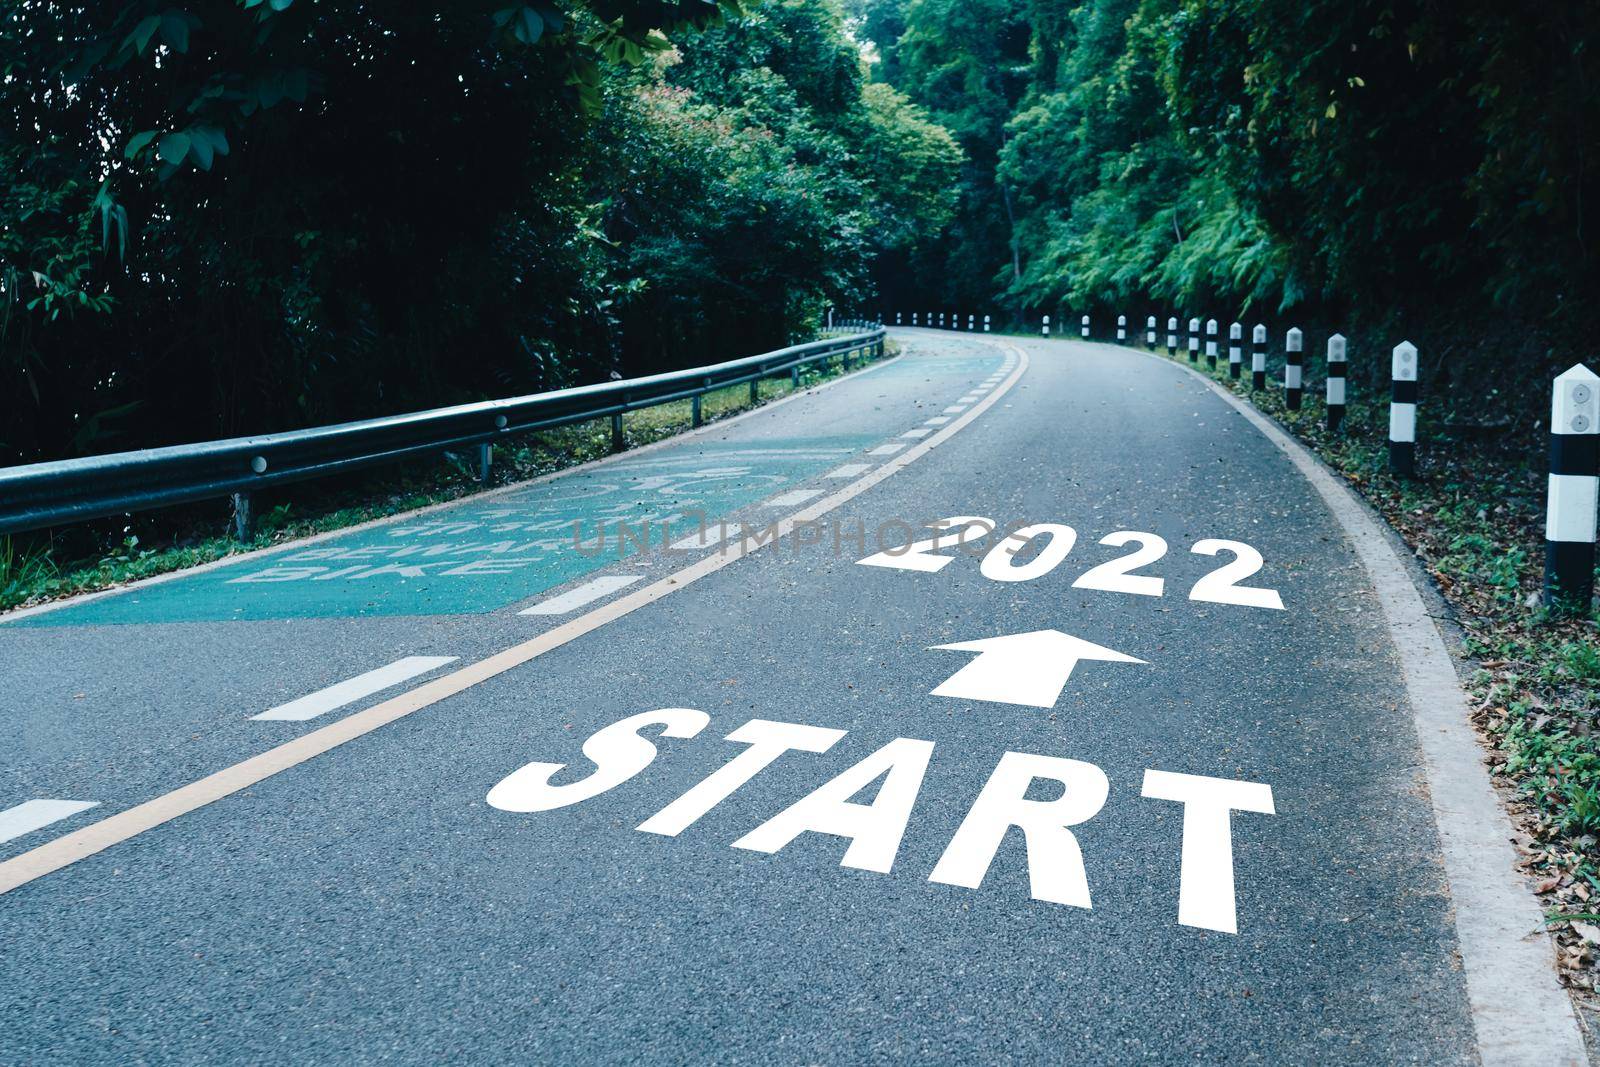 Start line to 2022 on road in wood the beginning of a journey to the destination in business planning, strategy and challenge or career path, opportunity. by Suwant